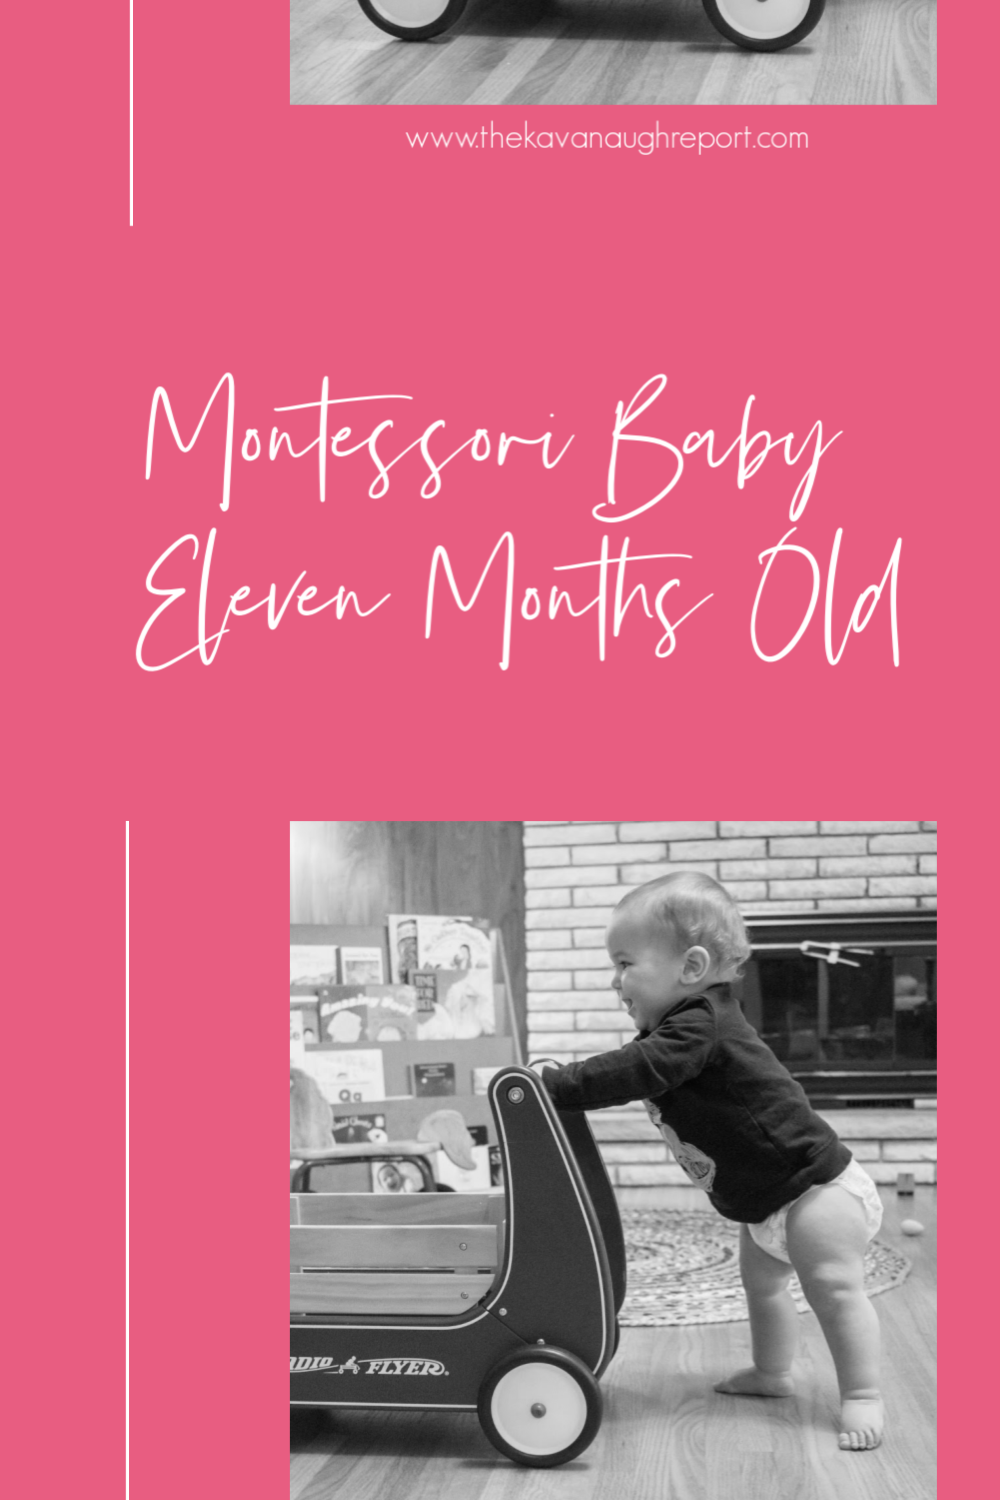 Using the Montessori method with your 11-month-old - articles and tips for using Montessori with your baby